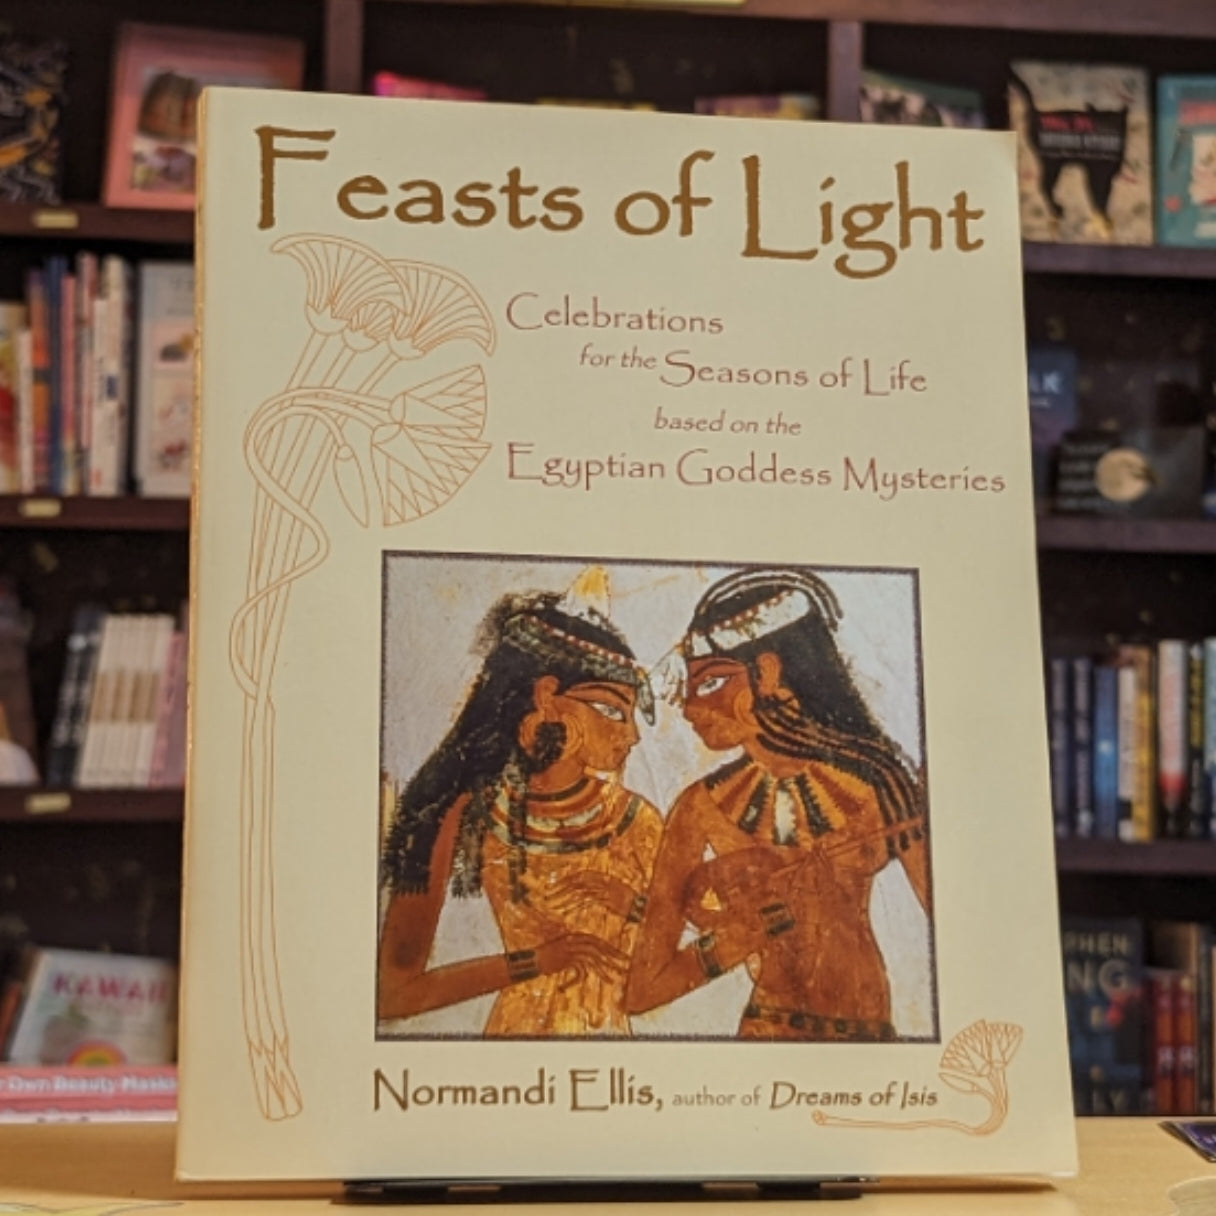 Feasts of Light: Celebrations for the Seasons of Life based on the Egyptian Goddess Mysteries